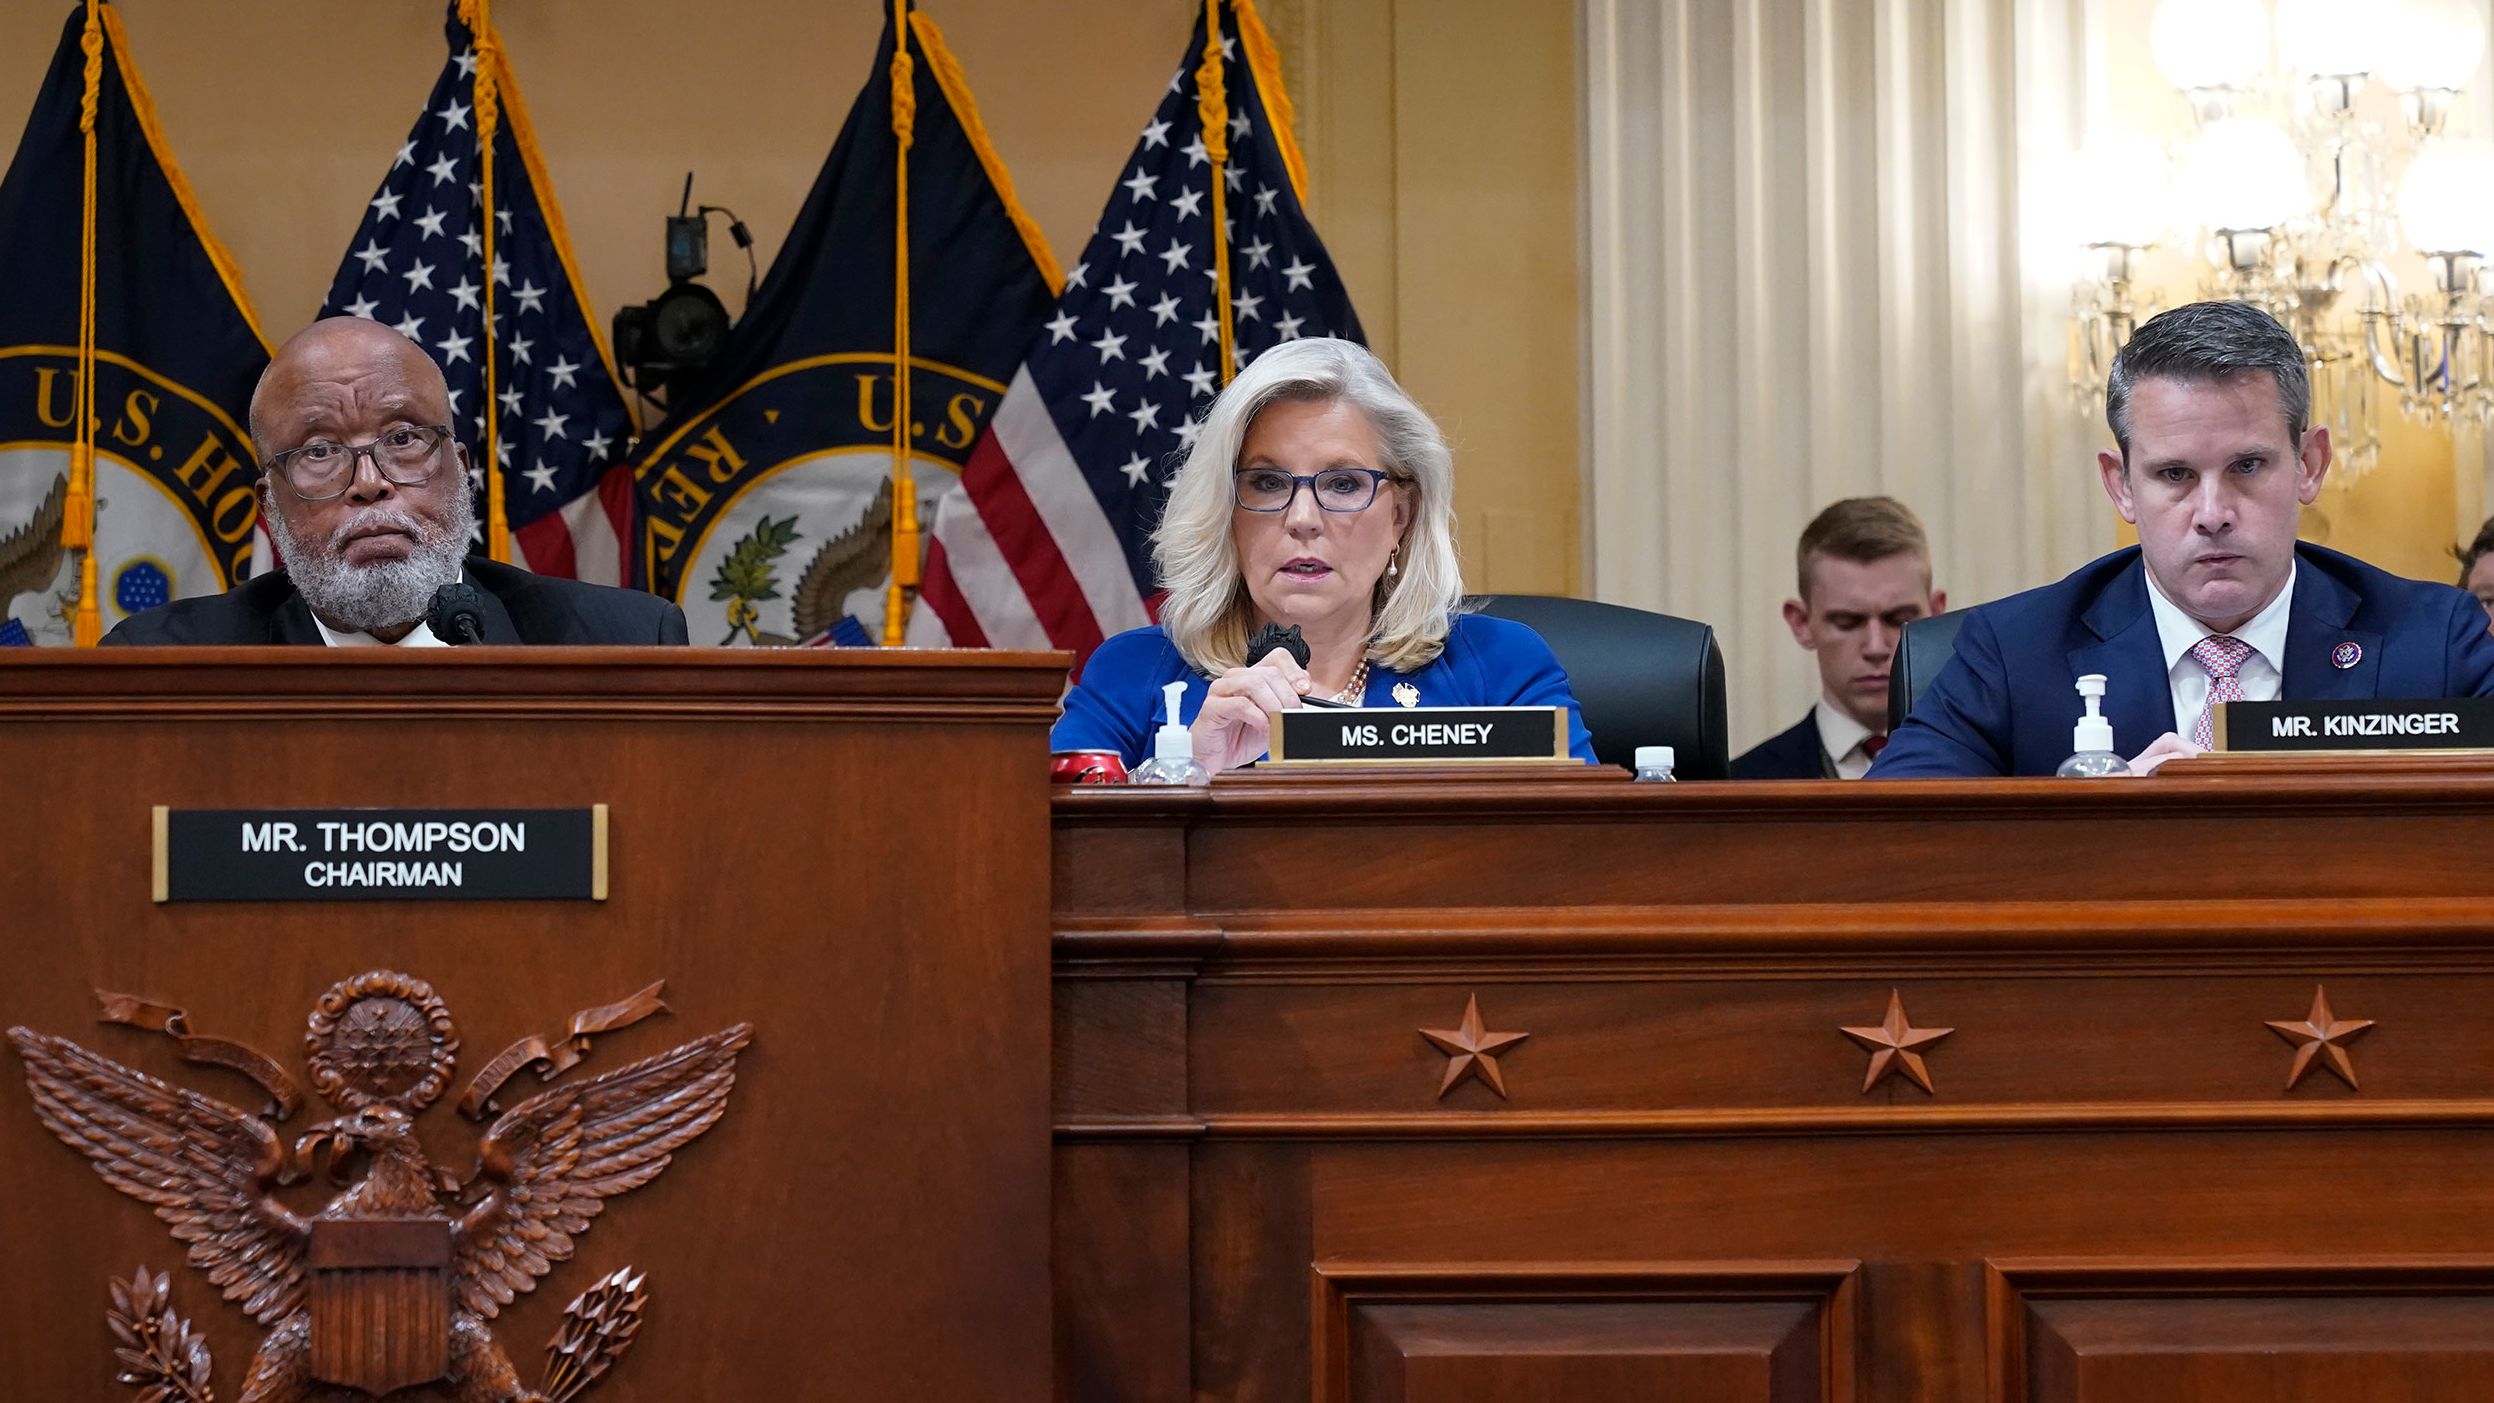 US Rep. Liz Cheney, the committee's vice chairwoman, offers a motion <a href="https://www.cnn.com/2022/10/13/politics/subpoena-trump-january-6-committee/index.html" target="_blank">to subpoena former President Donald Trump</a> on October 13.